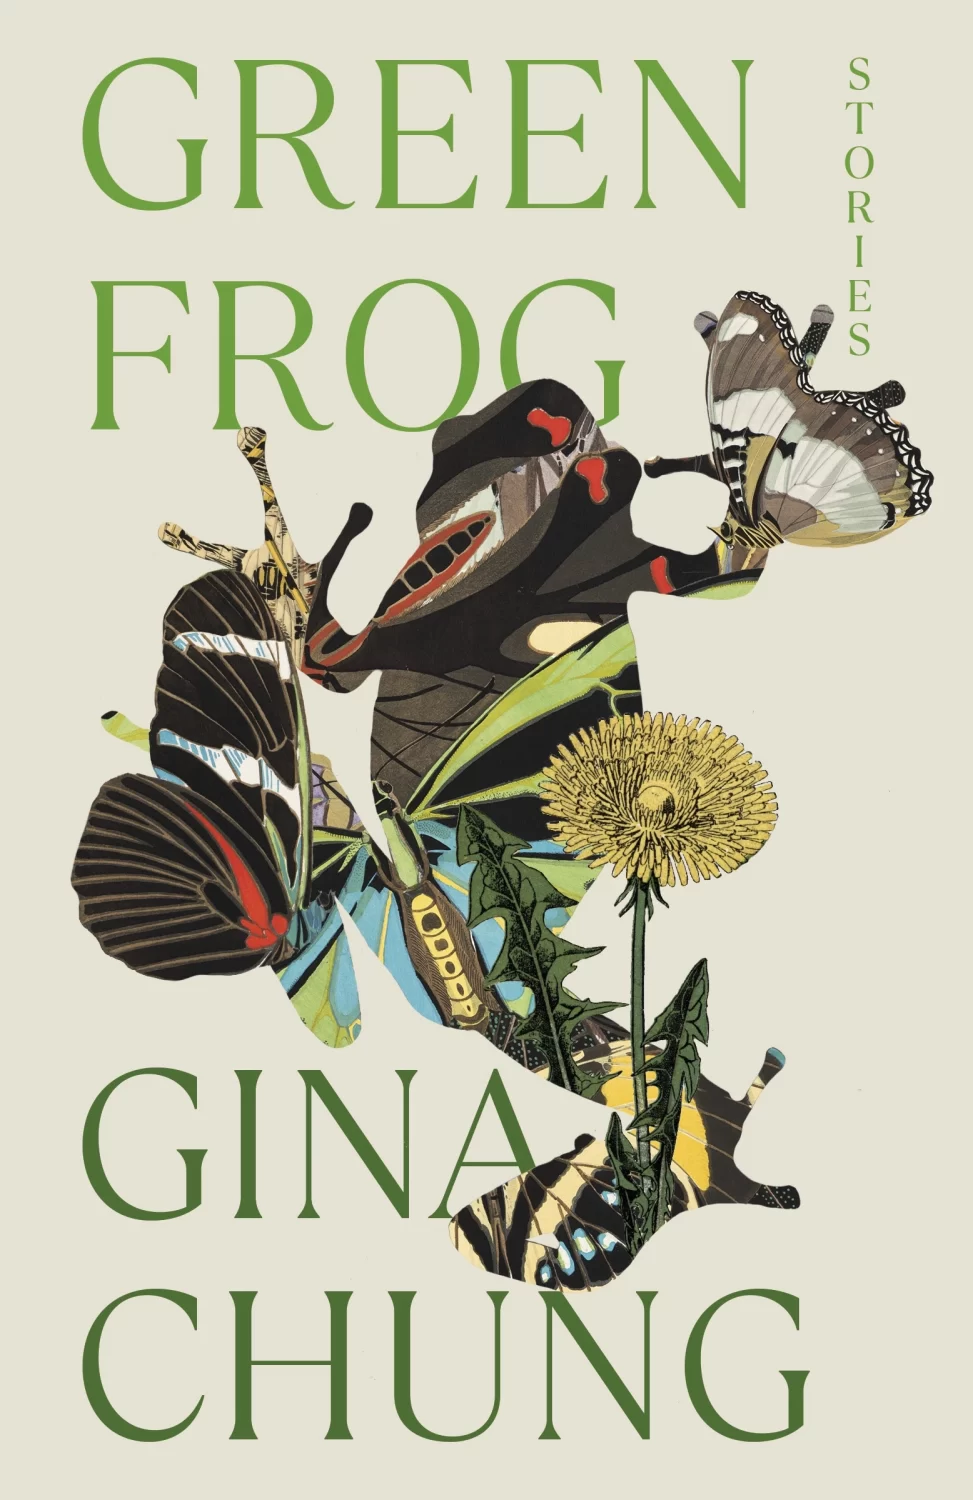 Green Frog, Stories by Gina Chung cover art, with the silhouette of a frog and butterflies and font in green text.